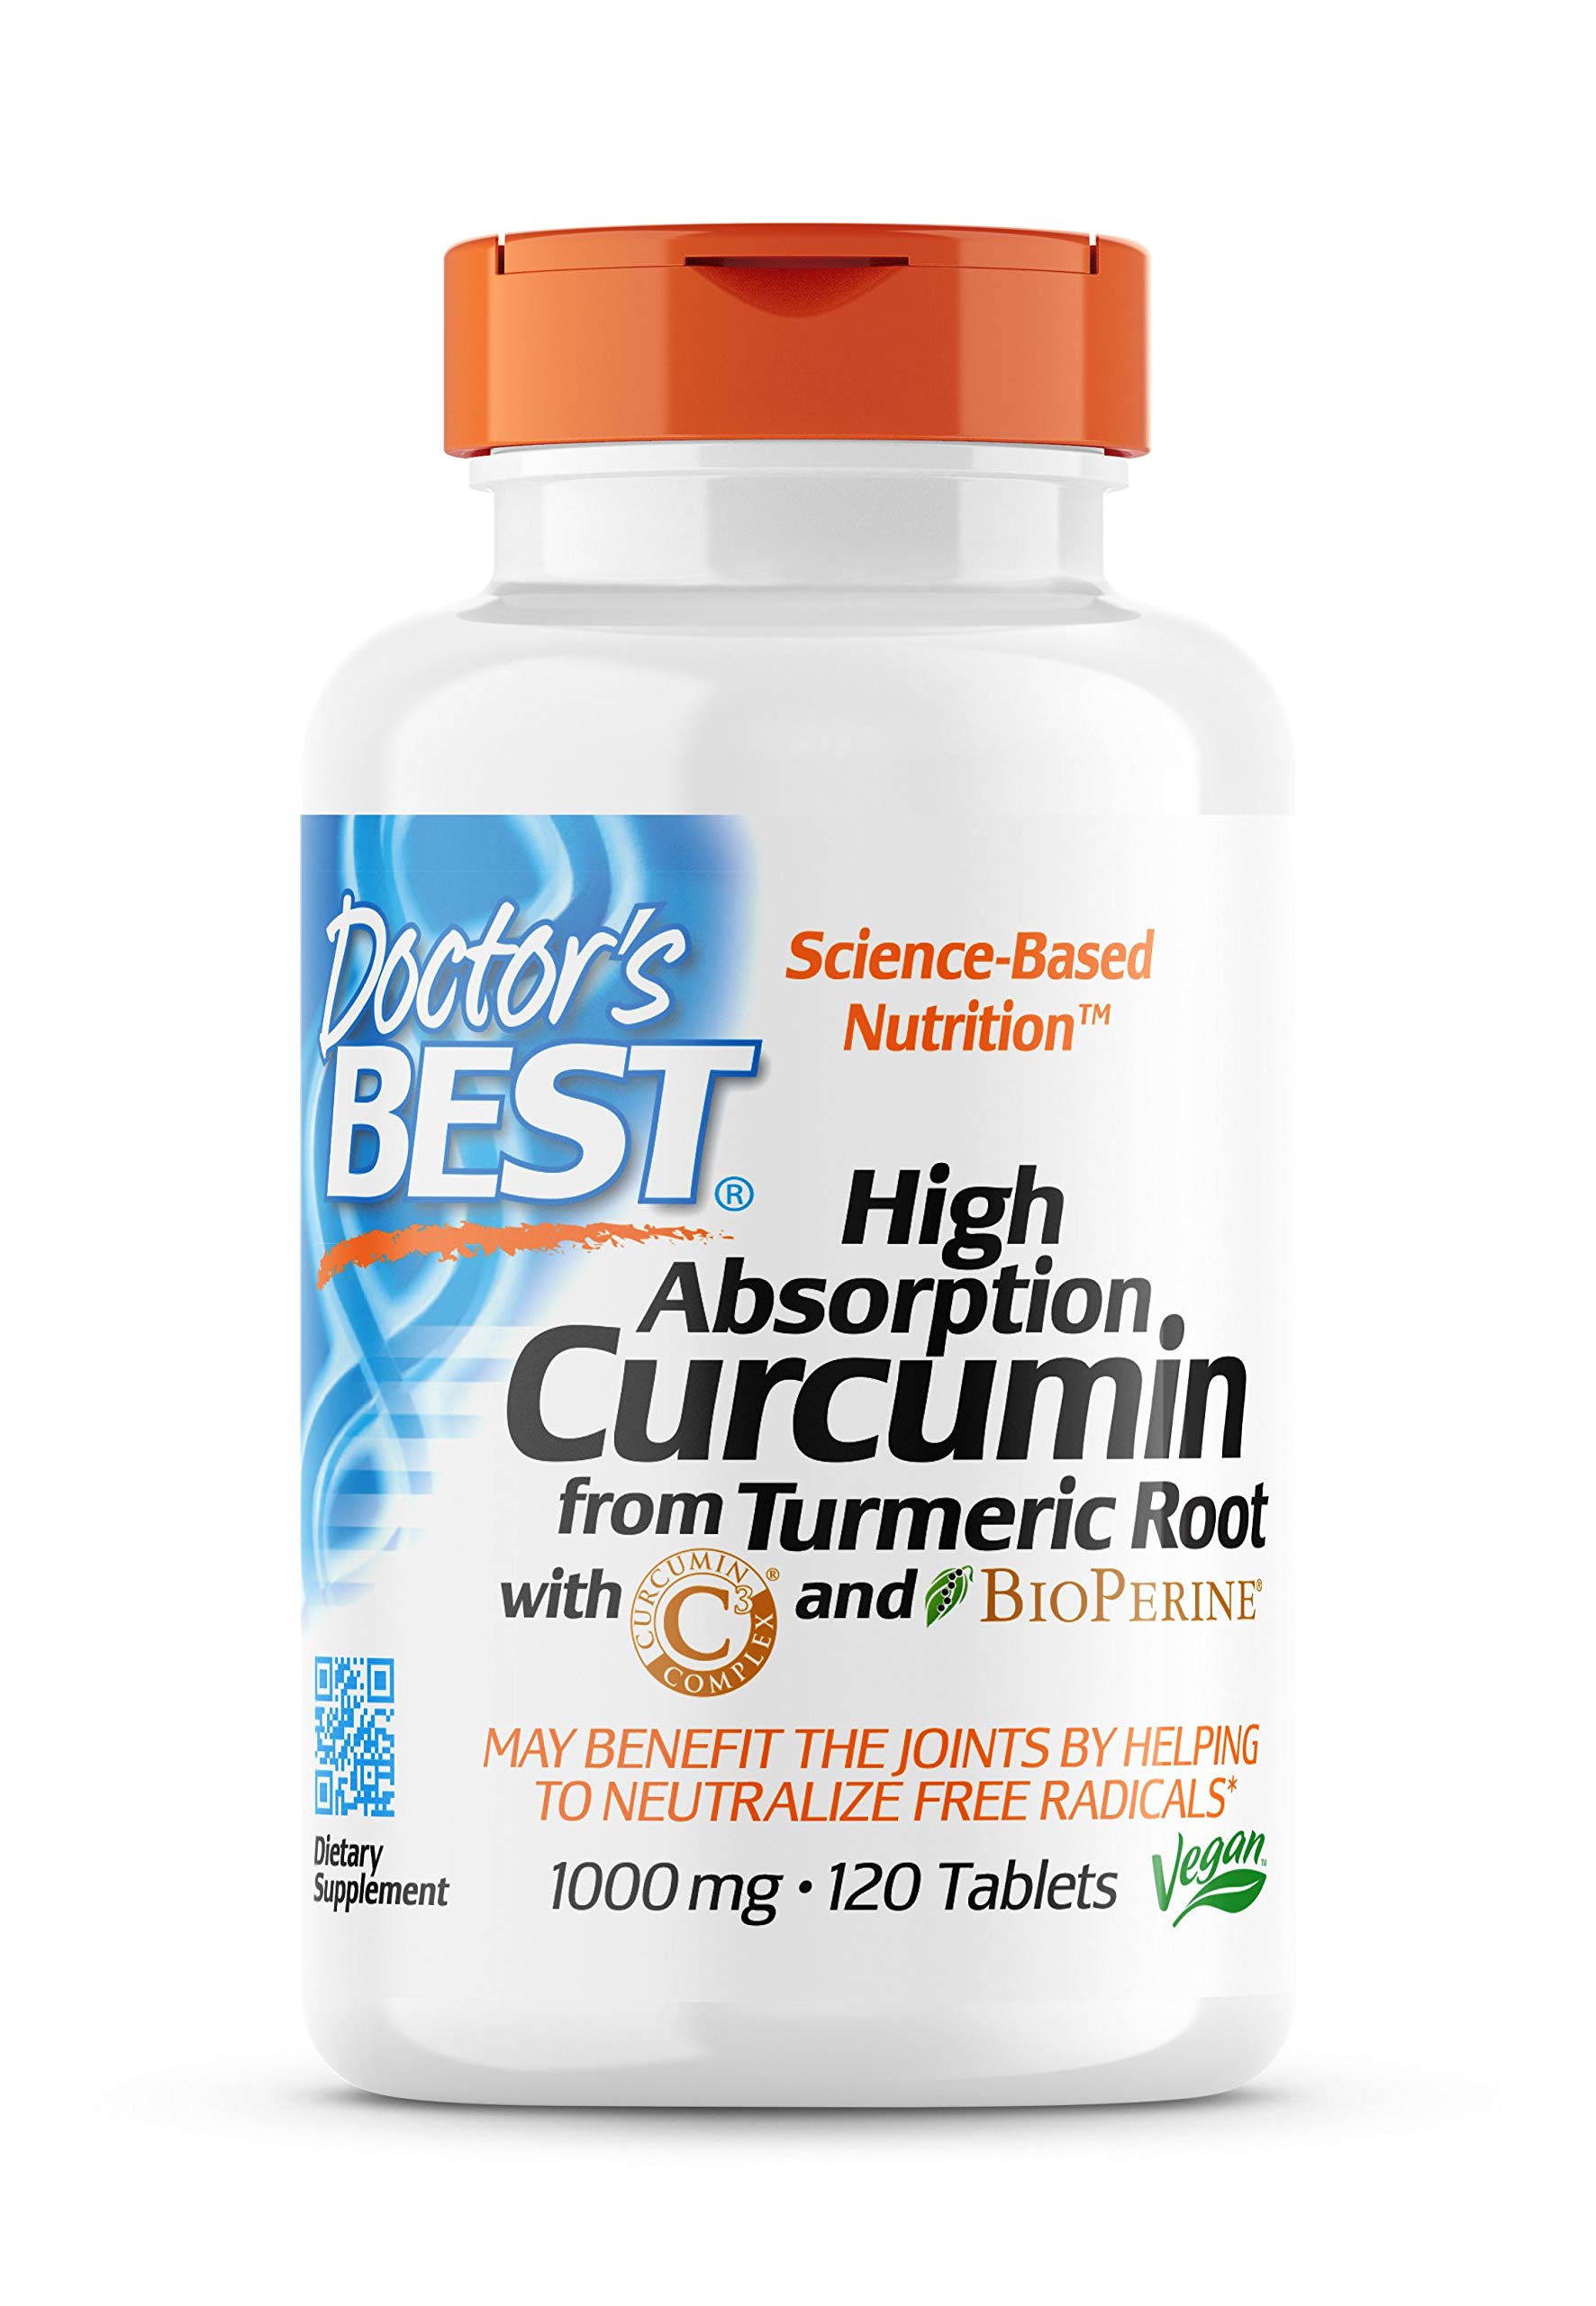 Curcumin from Turmeric Root with Curcumin C3 & BioPerine 1000mg 120 Count by Doctors Best